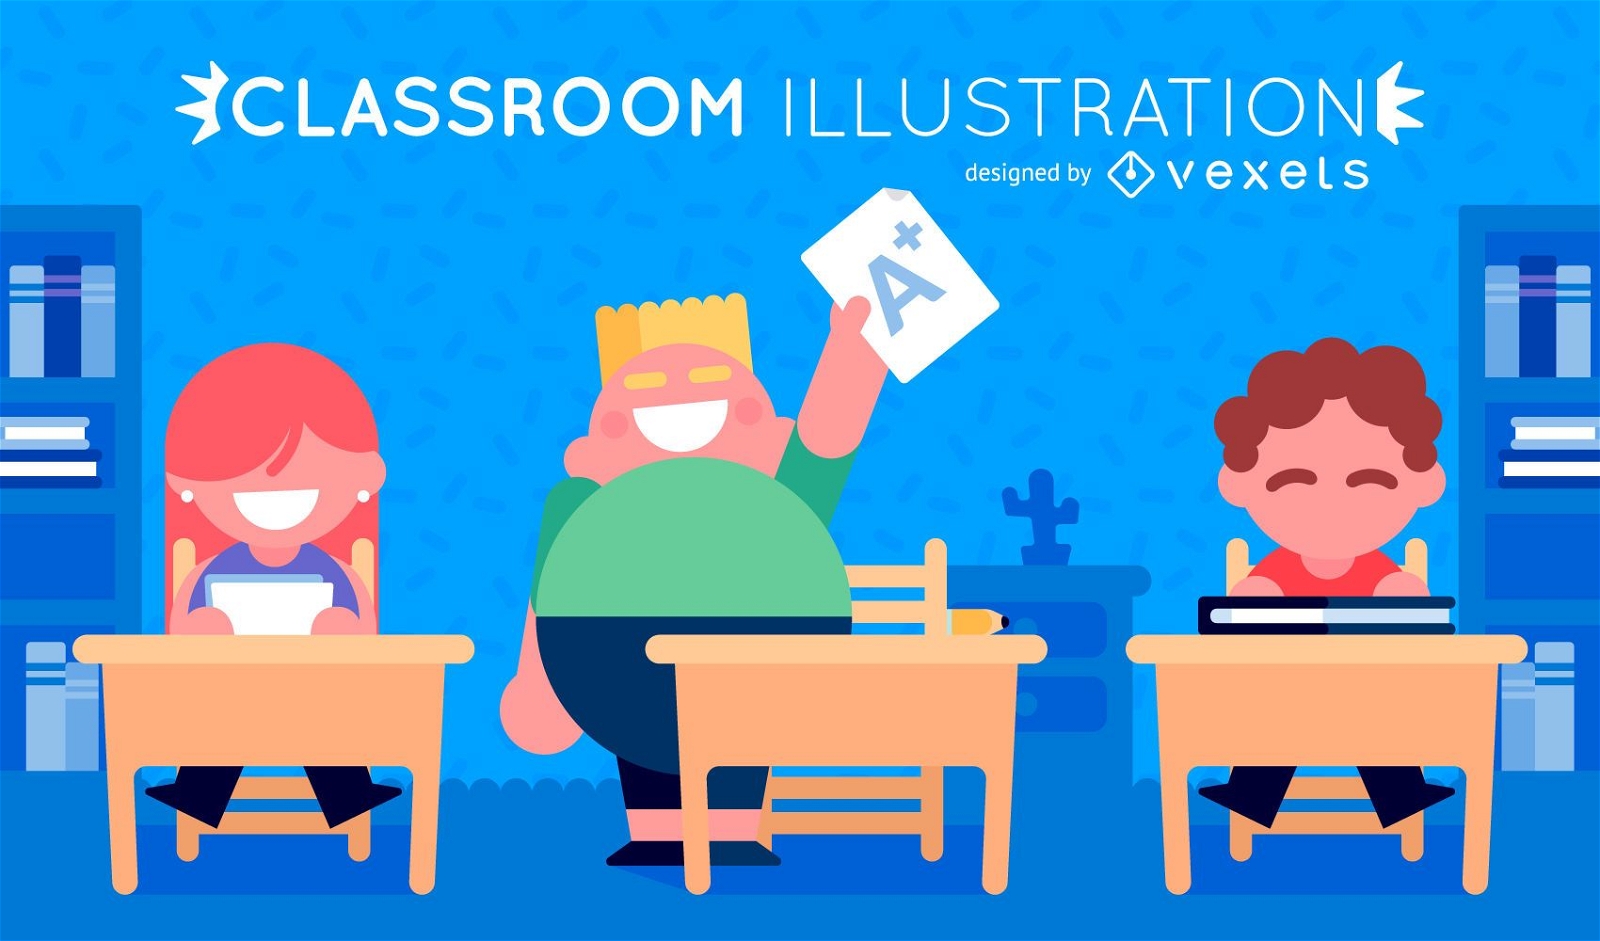 Classroom illustration with kids